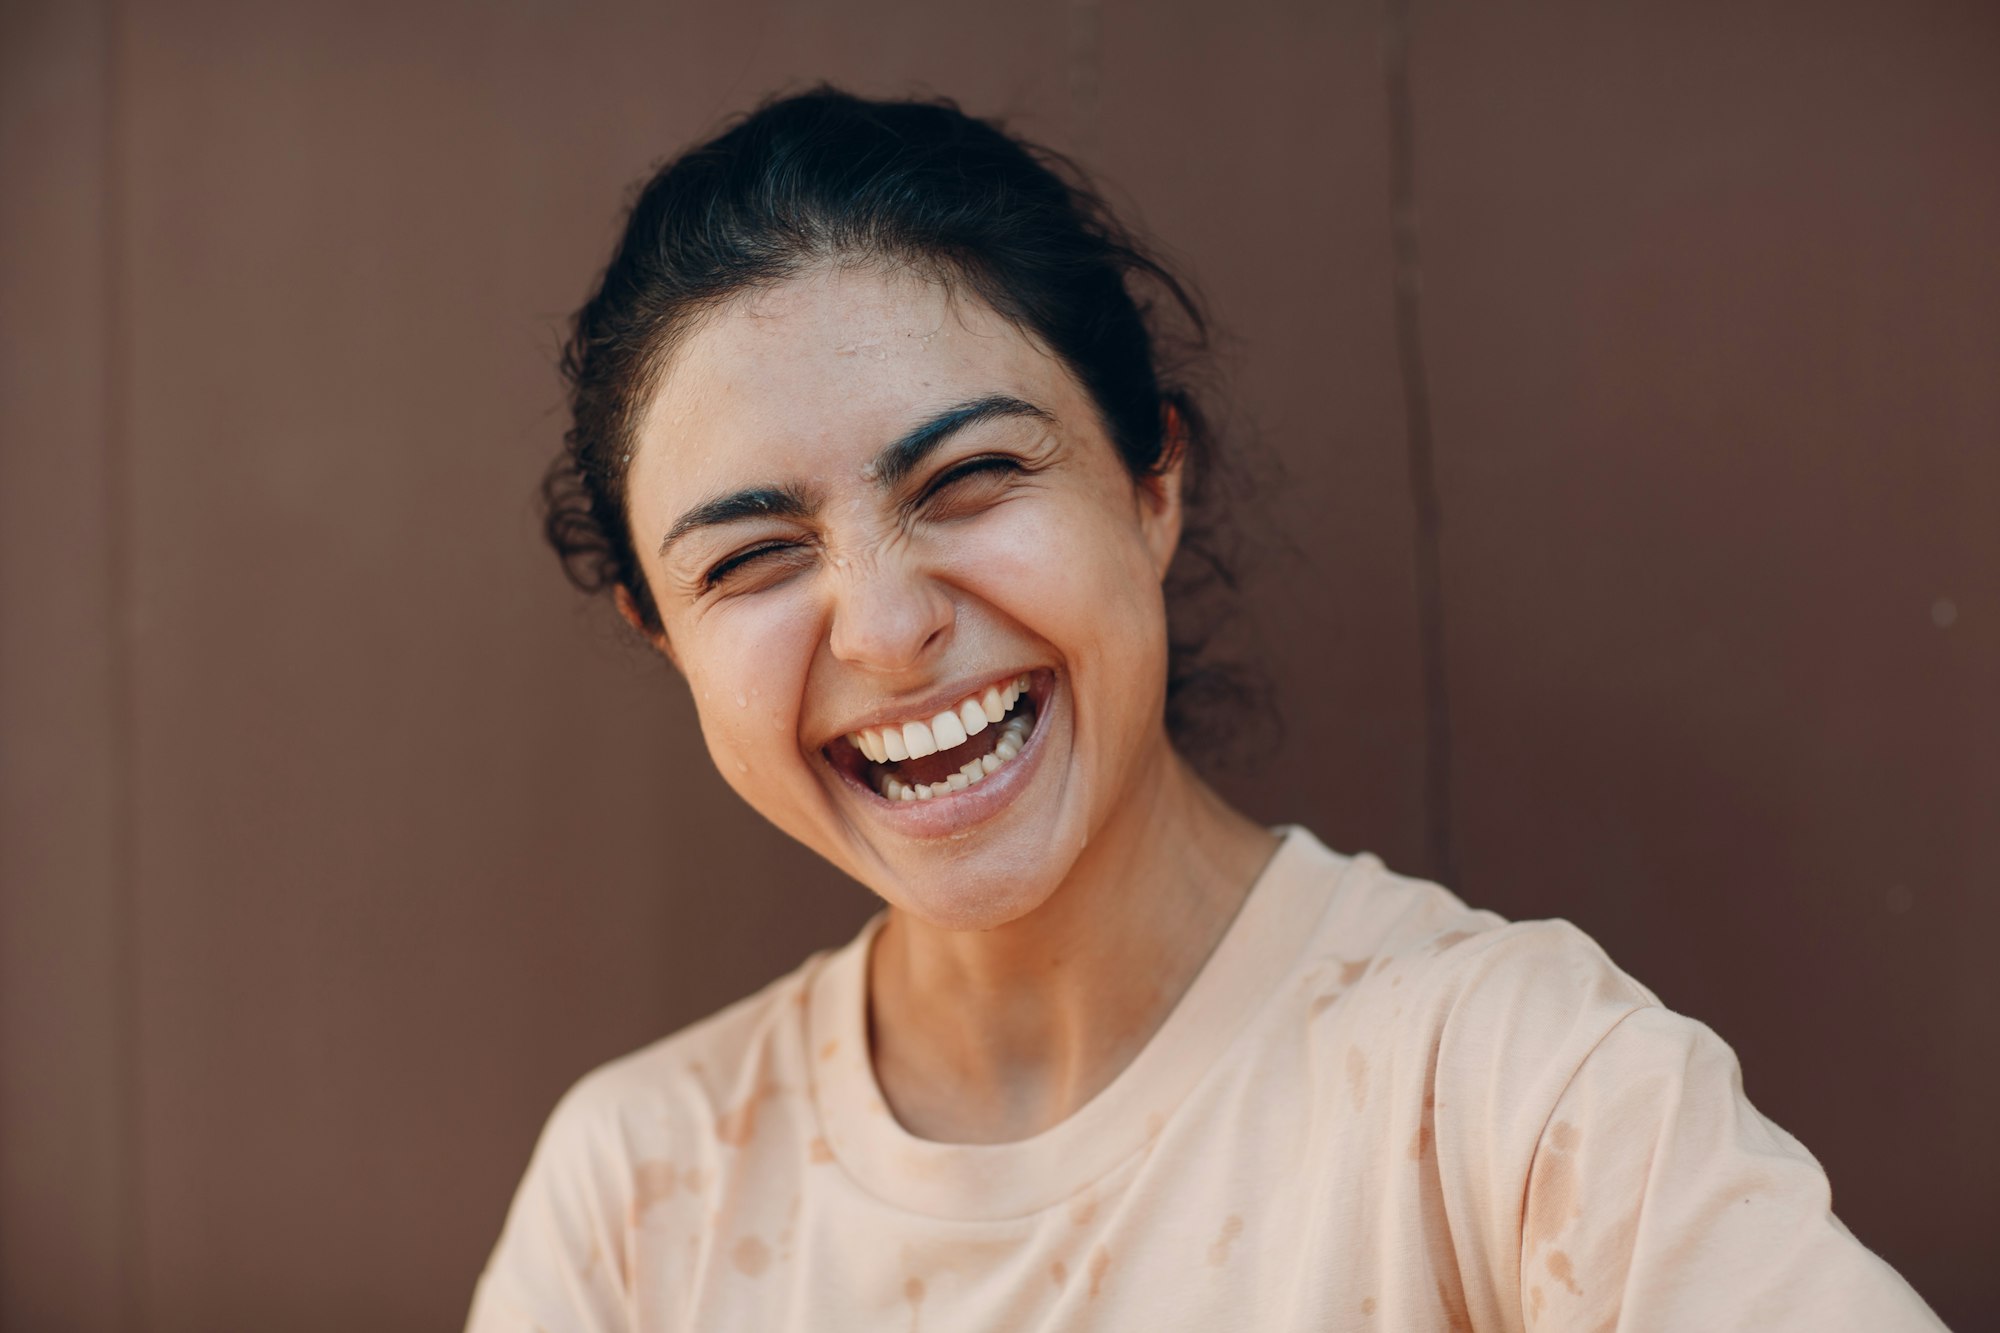 Indian woman laughing at city outdoor portrait